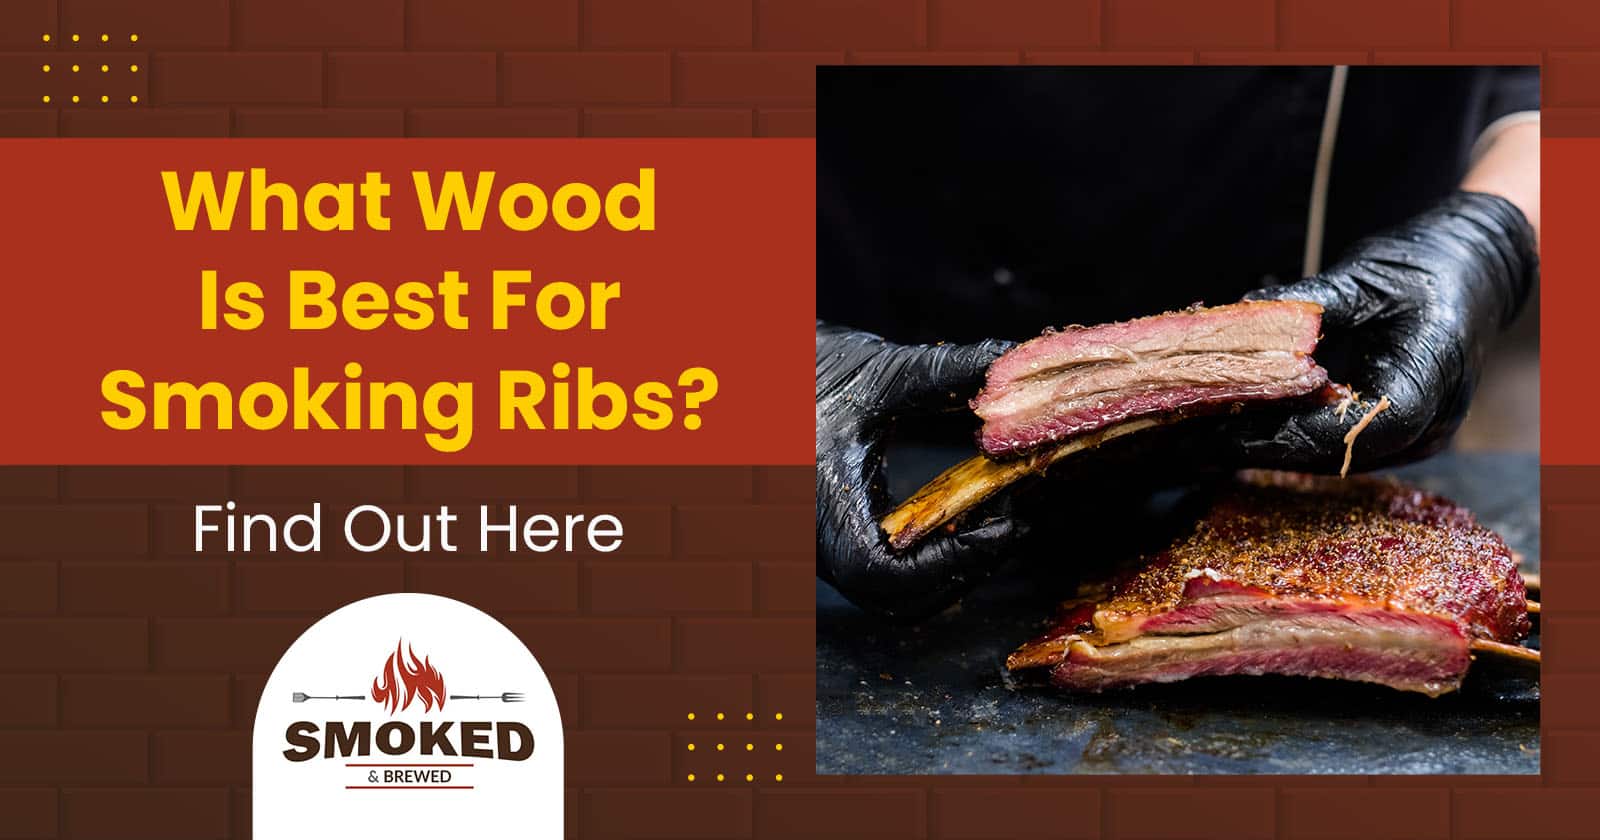 best wood for smoking ribs